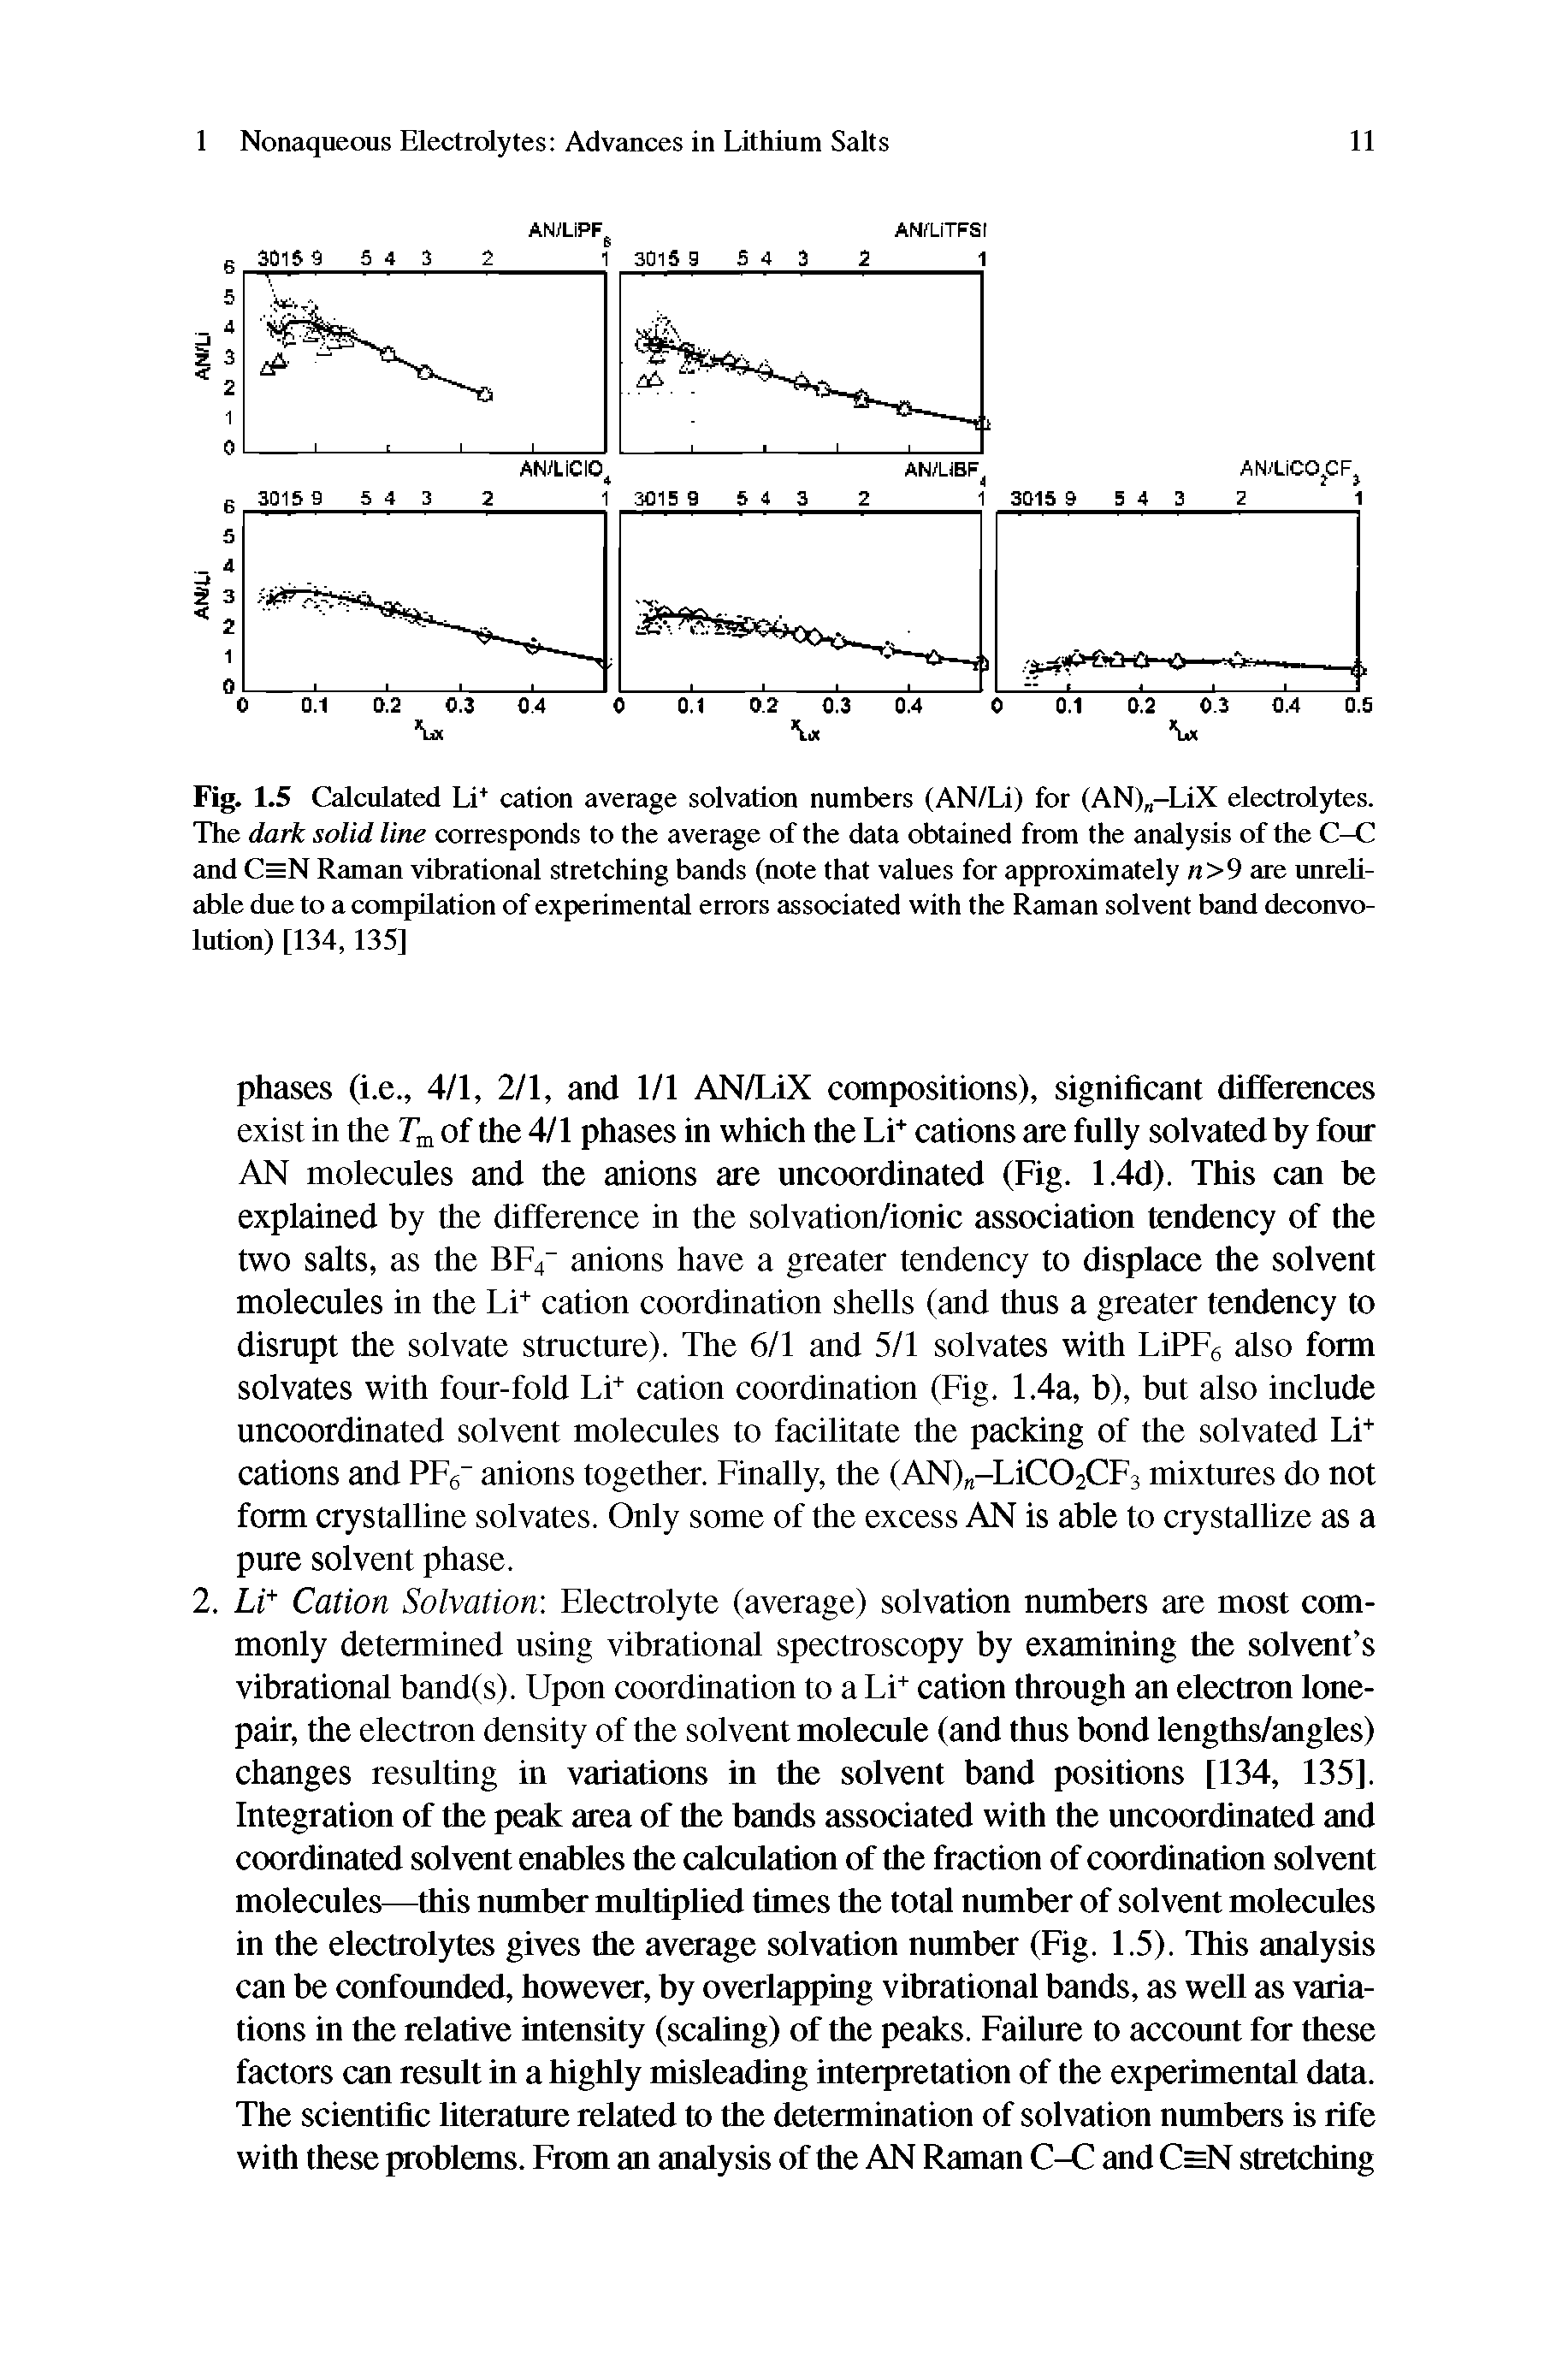 Fig. 1.5 Calculated Li cation average solveition numbers (AN/li) for (AN) -LiX electrolytes. The dark solid line corresponds to the average of the data obteiined from the analysis of the C-C and C=N Raman vibrational stretching bands (note that vedues for approximately n>9 are unreliable due to a compilation of experimental errors associated with the Raman solvent band deconvolution) [134,135]...